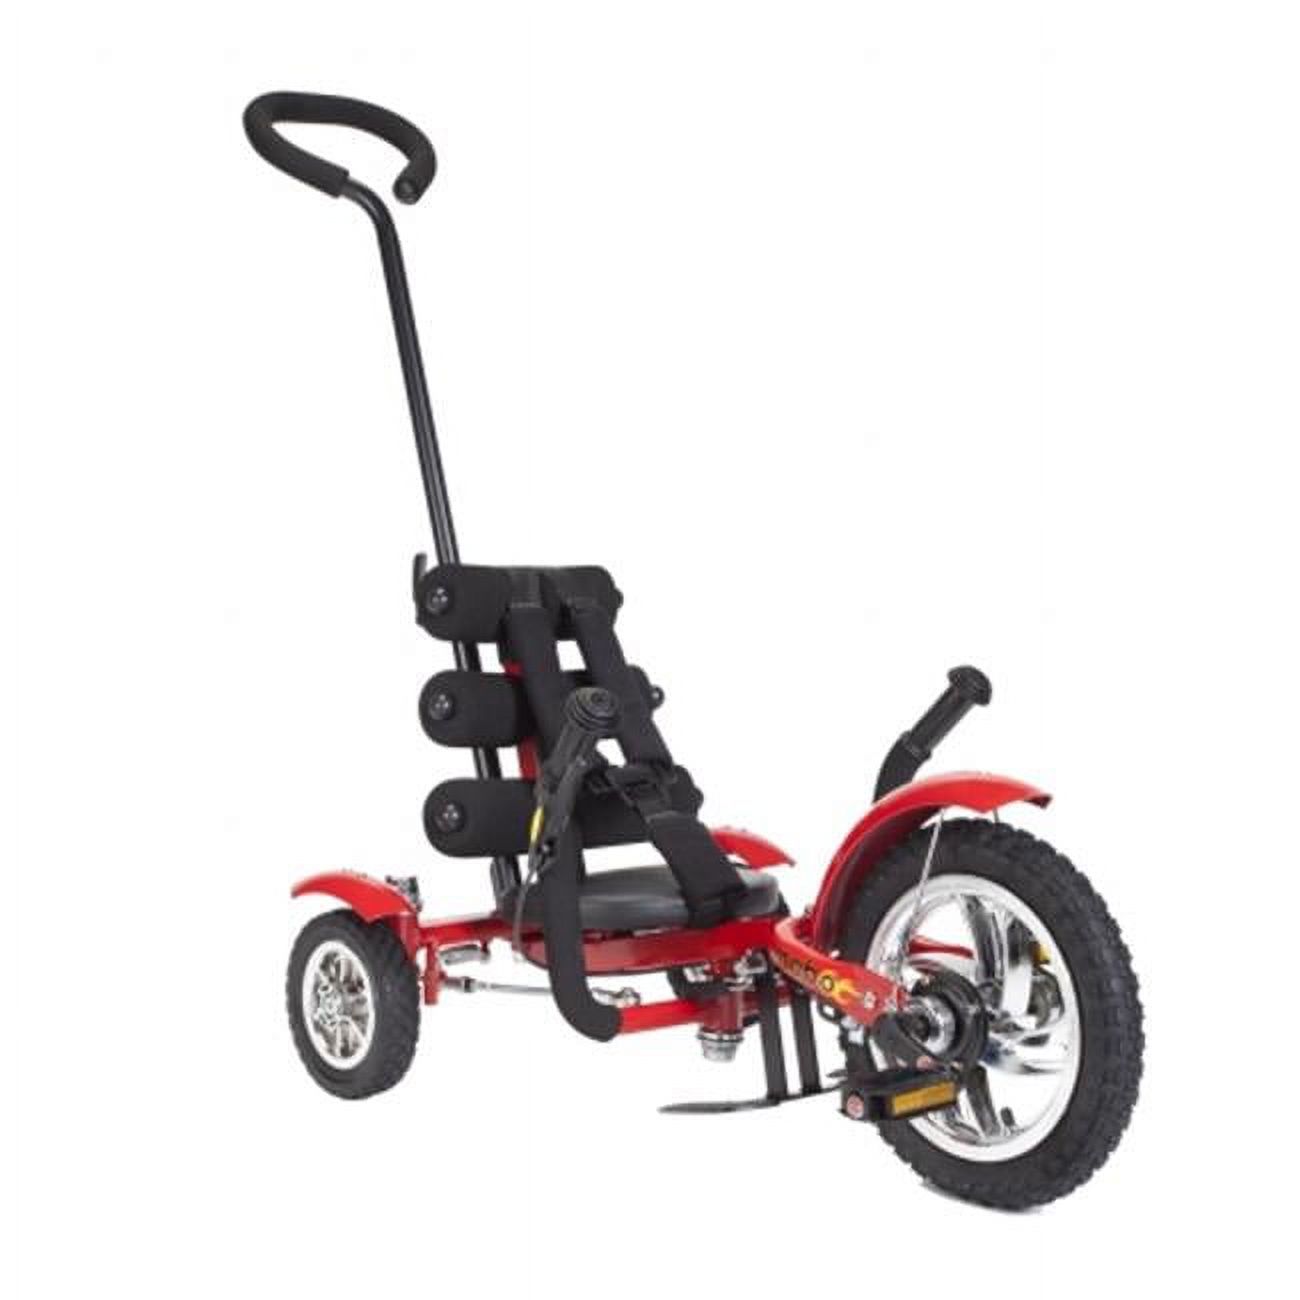 Mobo Mega Mini: The Roll-to-Ride 3-Wheeled Cruiser Tricycle, Push & Pedal Ride On Toy, Red - image 1 of 6